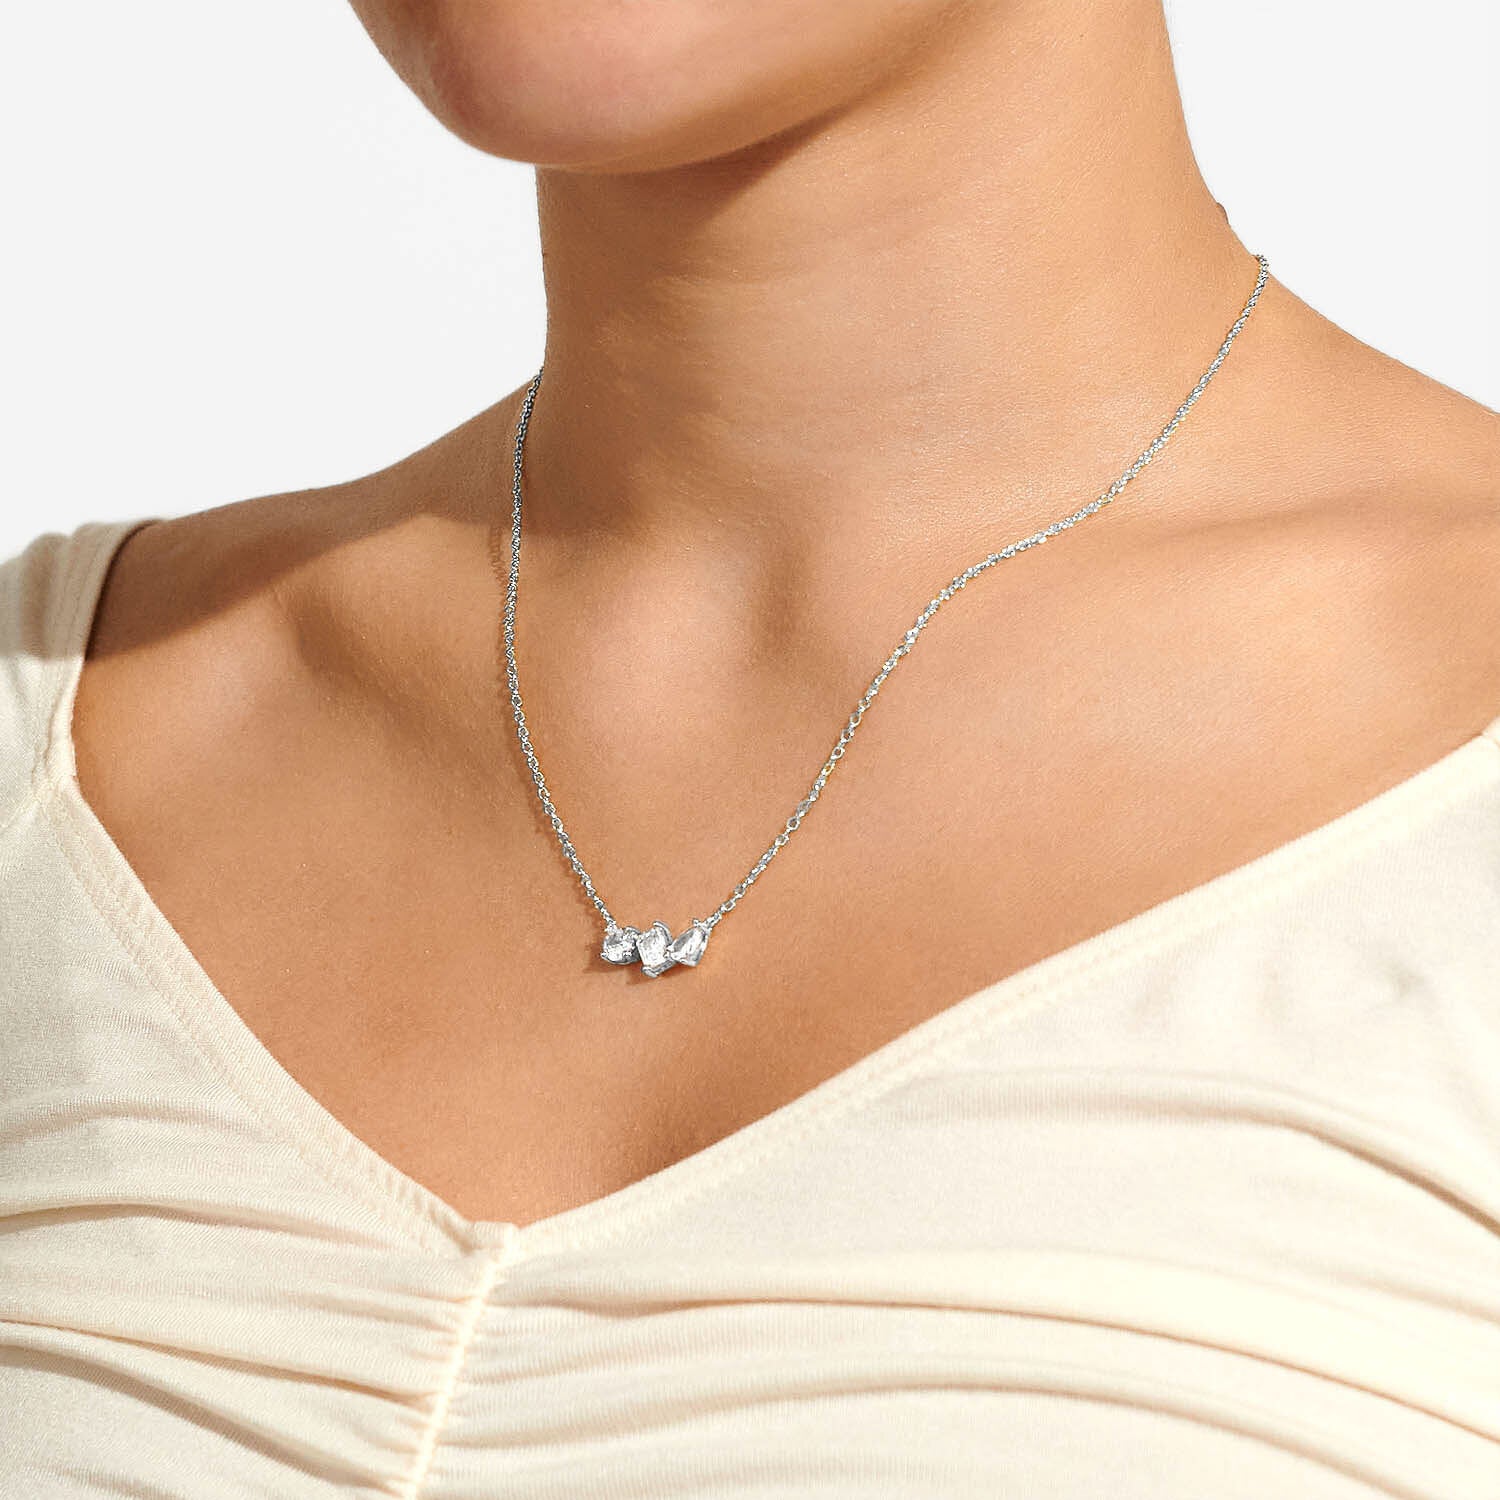 Love From Your Little Ones 'Three' Necklace - Joma jewellery